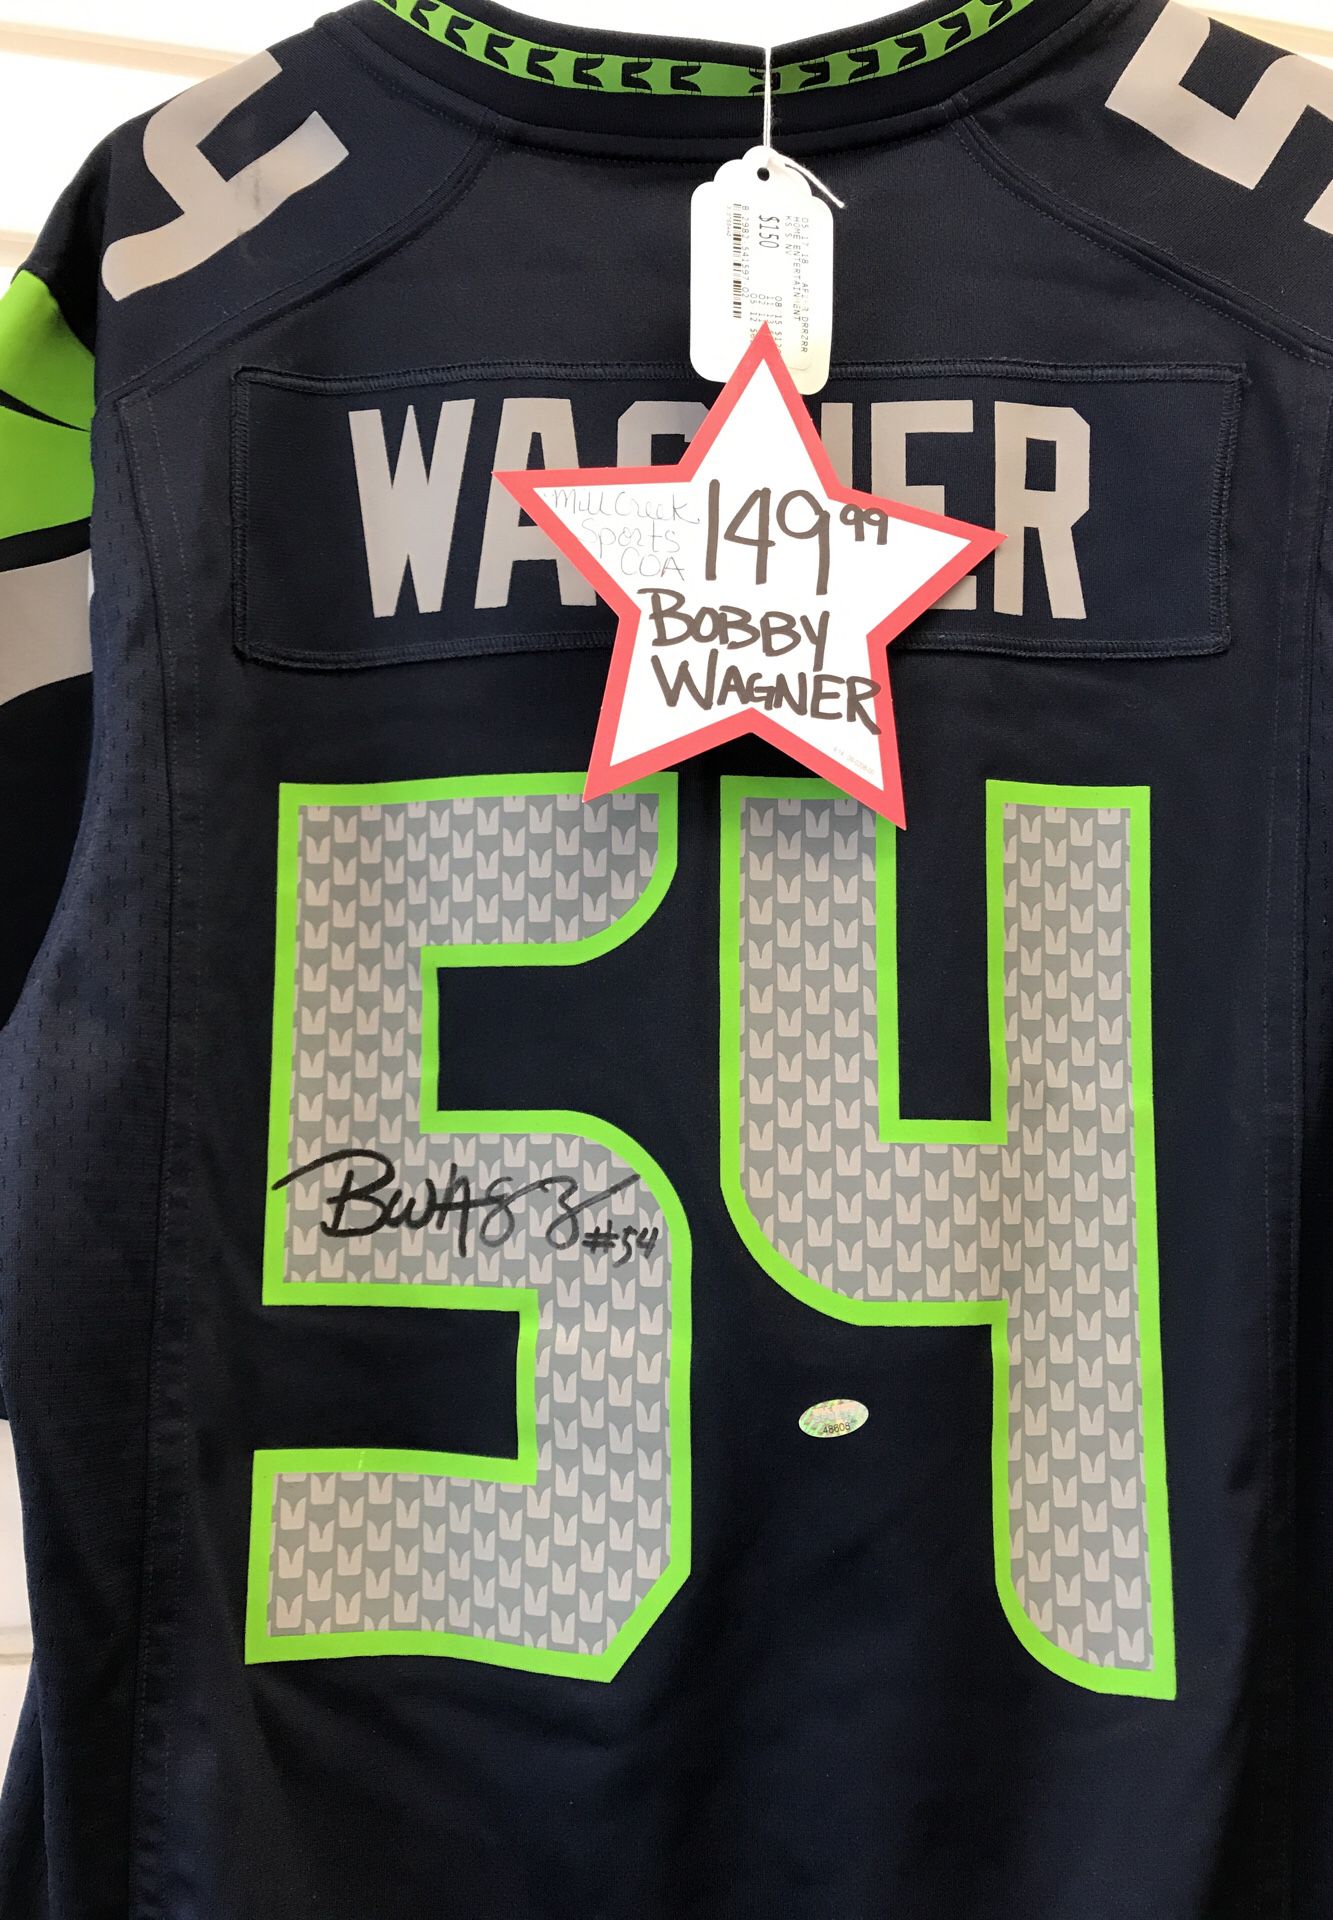 Autographed Seahawks Bobby Wagner jersey authentic for Sale in Everett, WA  - OfferUp